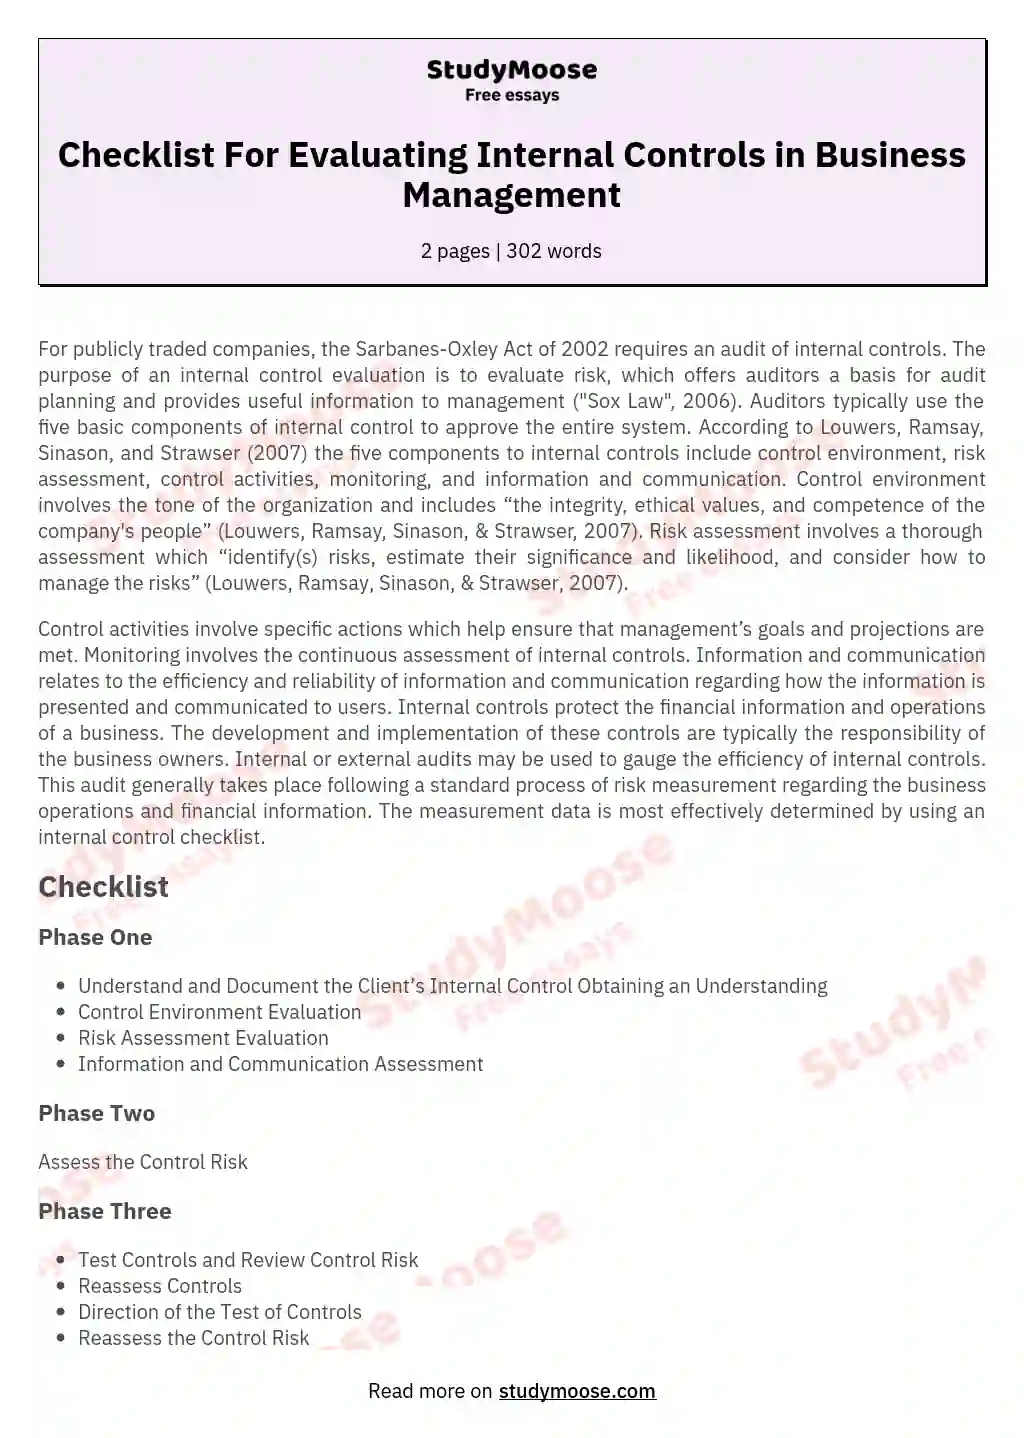 Checklist For Evaluating Internal Controls in Business Management essay